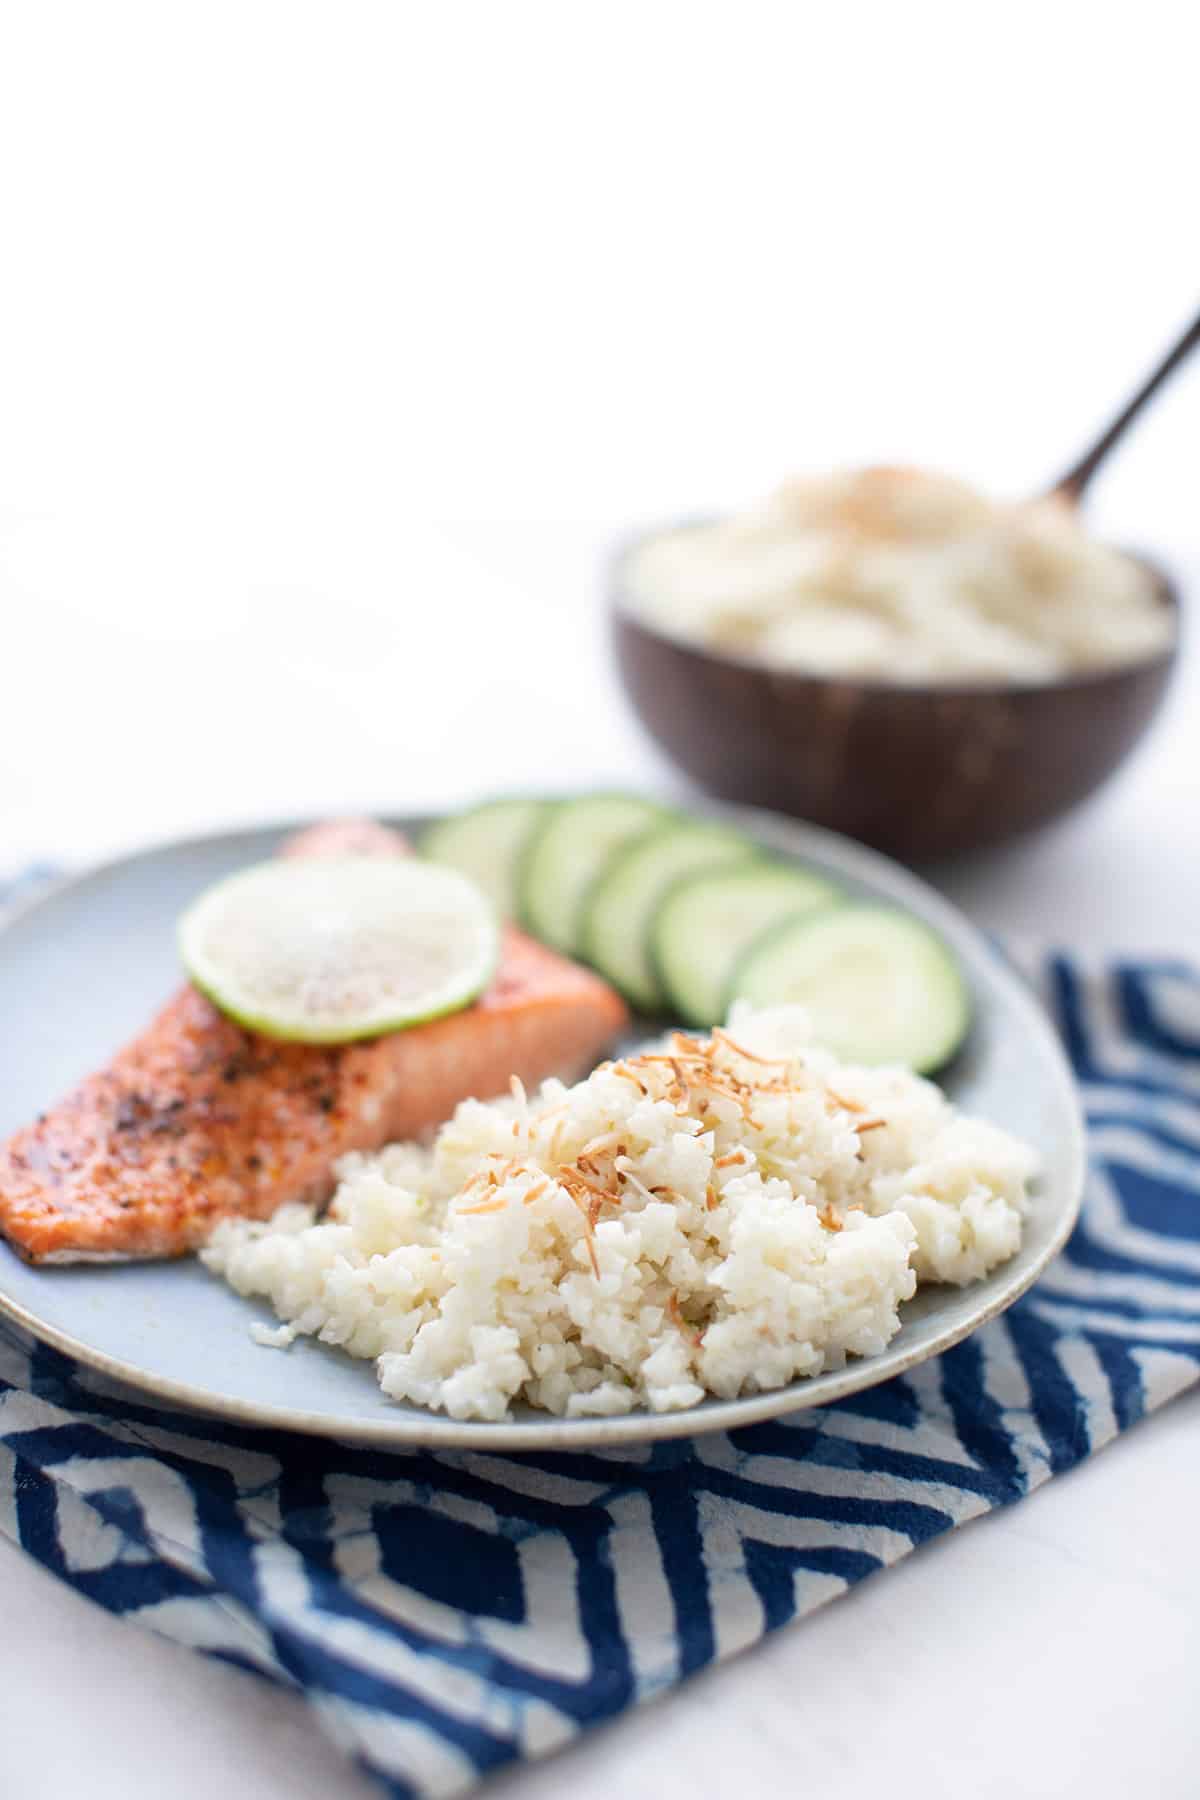 A blue plate filled with coconut cauliflower rice, salmon, and cucumber over a blue patterned napkin.